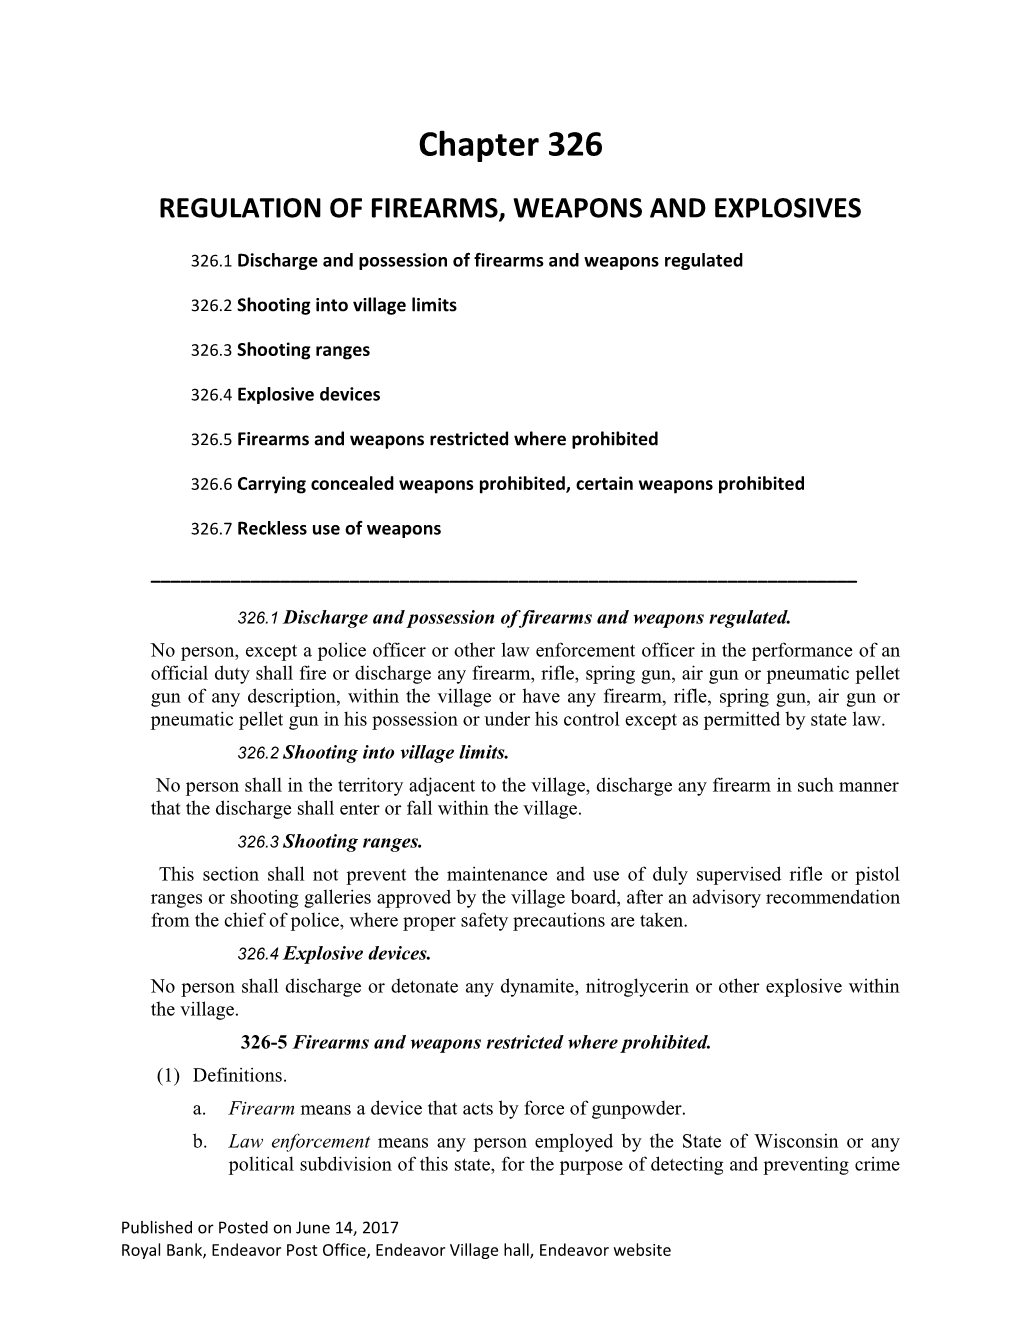 Regulation of Firearms, Weapons and Explosives